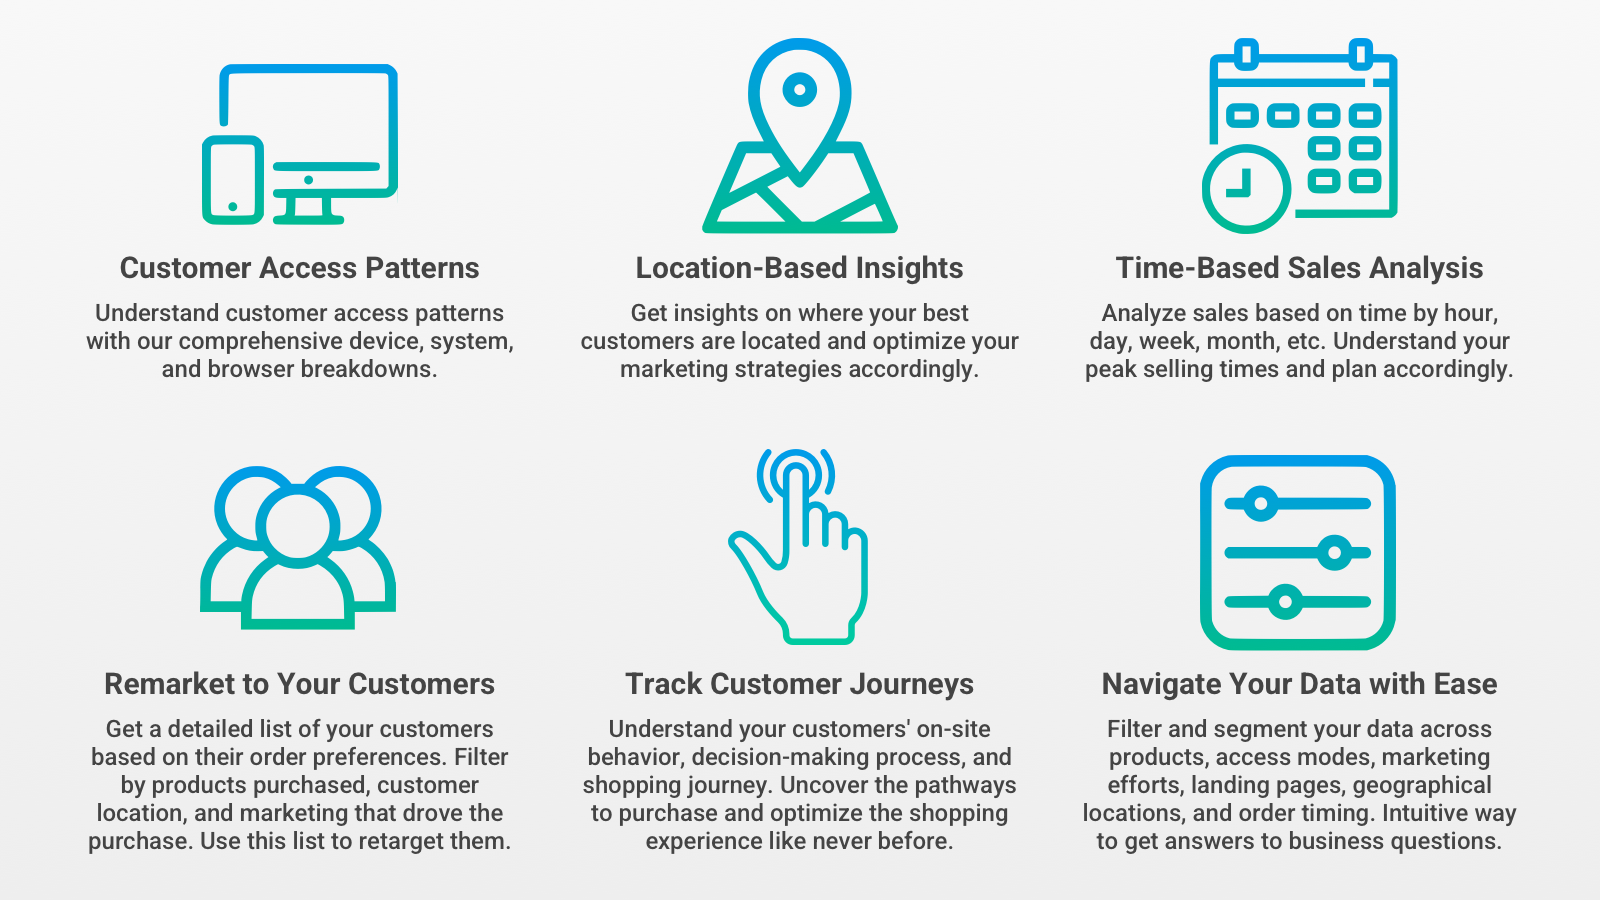 Track customer journeys, examine access pattern and locations